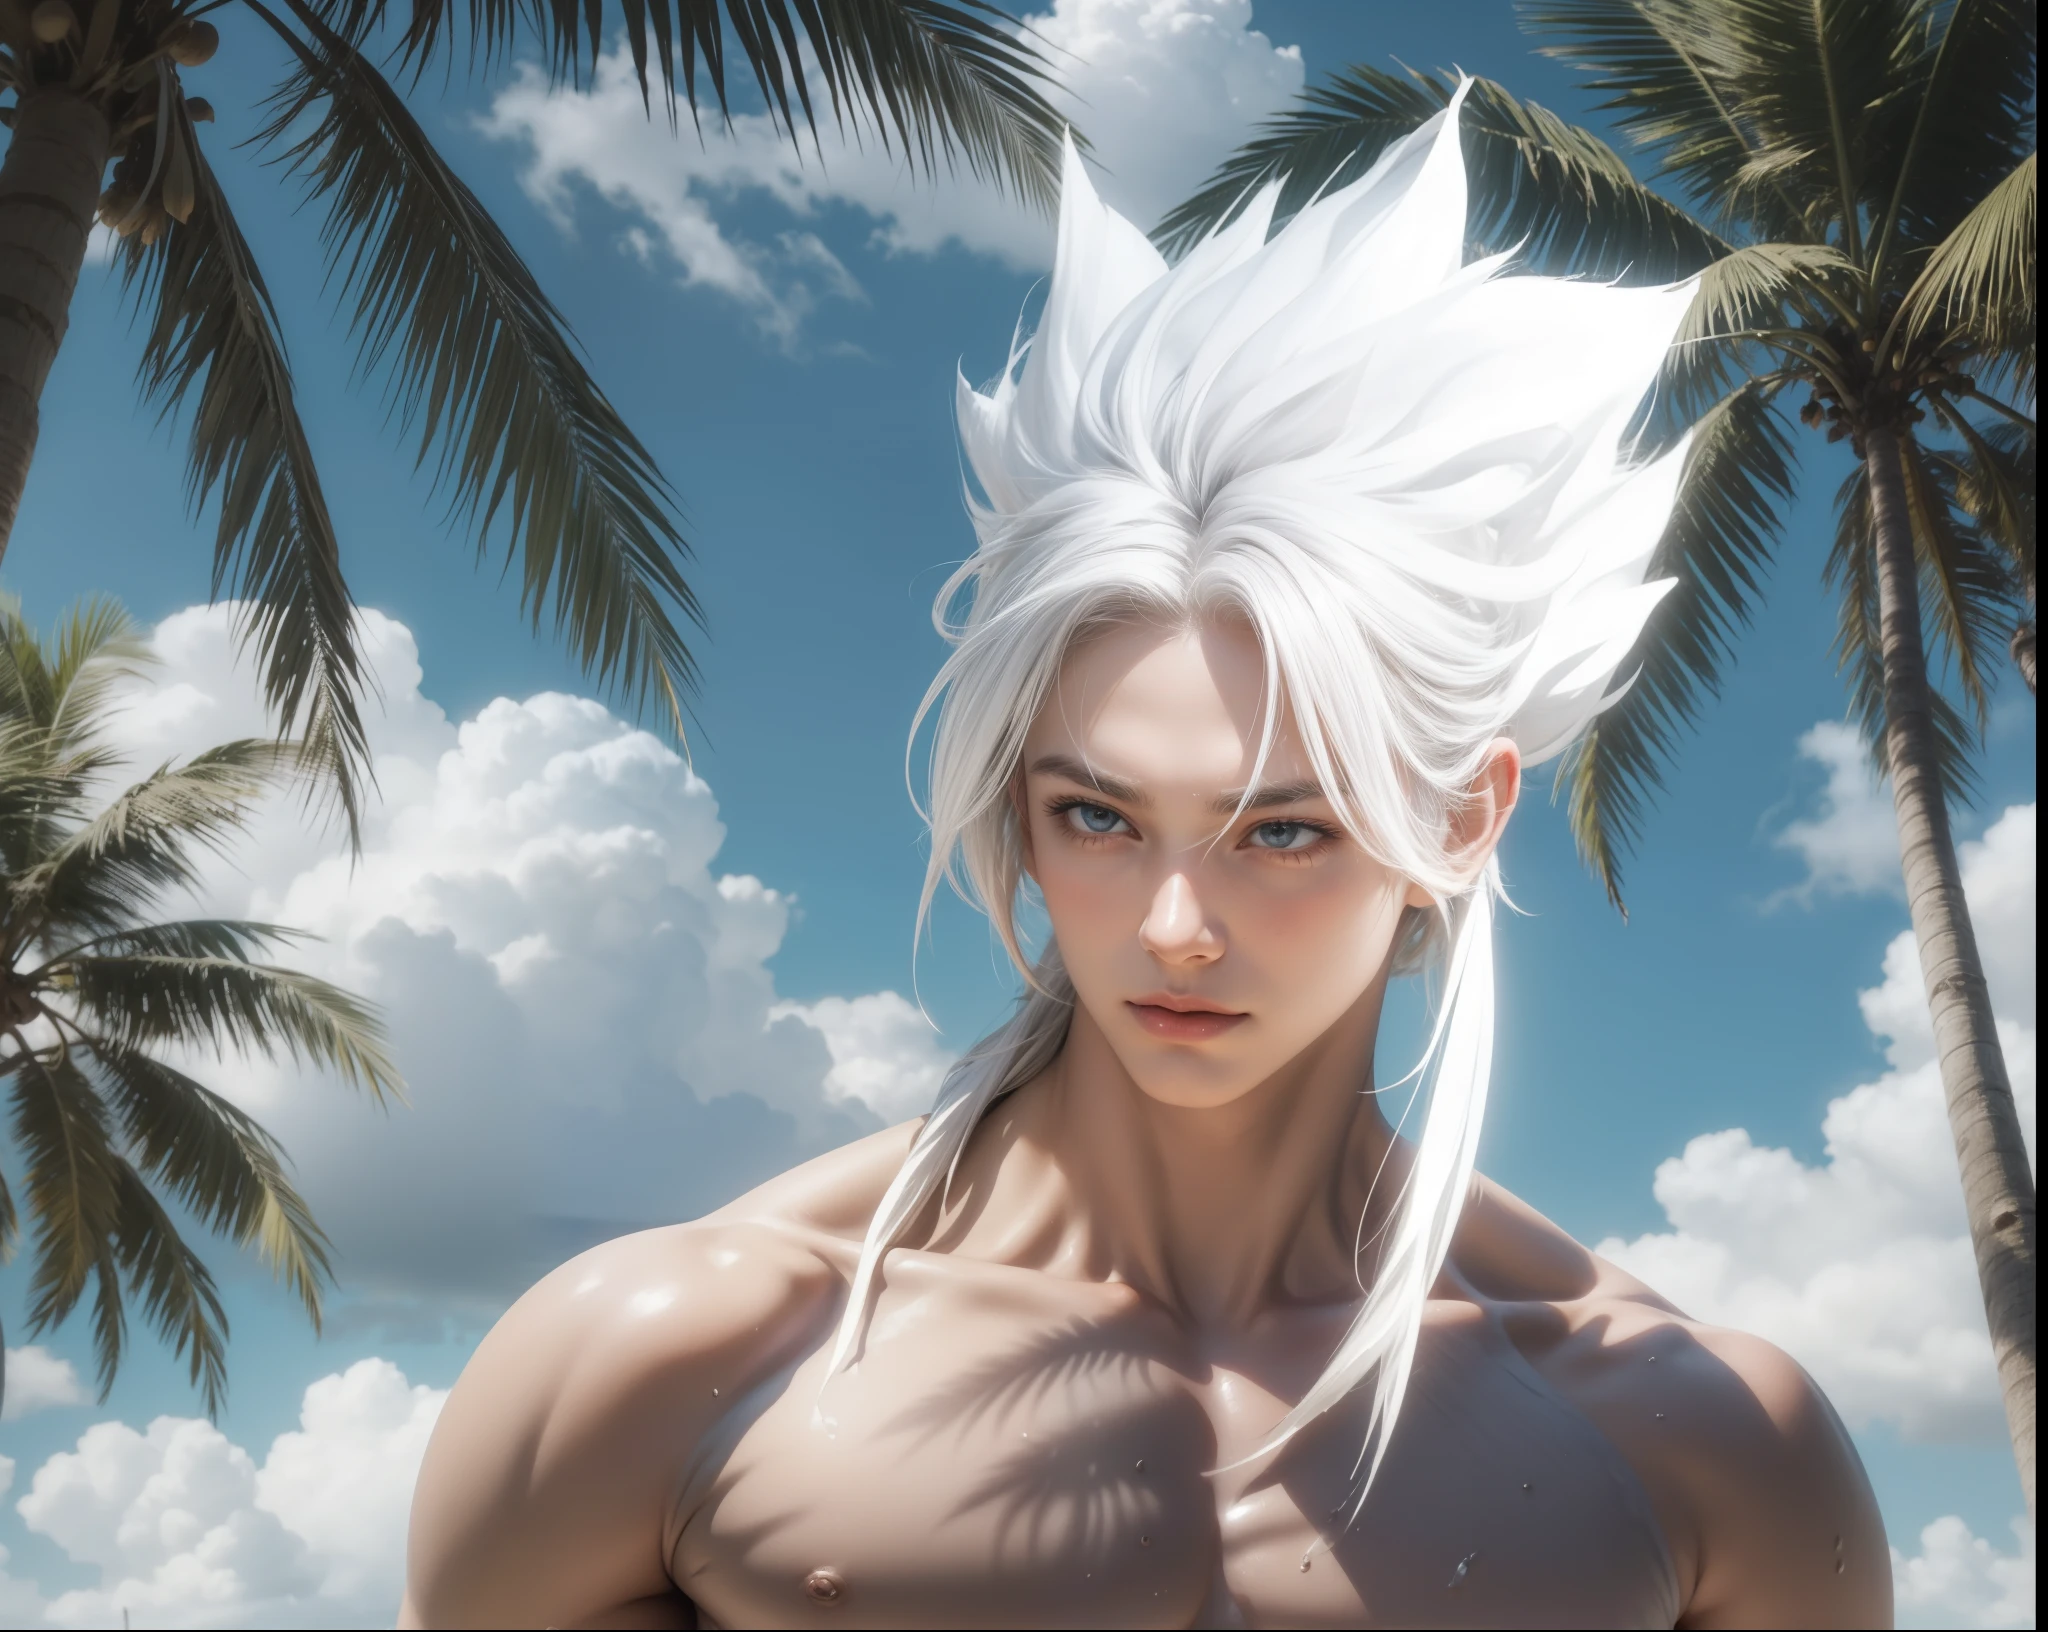 maximum resolution: 1.2), (Ultra HDTV: 1.2), 8K resolution, Eye and skin details, face details, , (Sharp focus: 1, 2), (Precise focus) facial expressions: 1,2), Boy, (White hair), (Naked), Natural skin, No hair, Perfect muscles, 8 packs, (Sweat on stomach and chest), ((( White briefs: 1.2))), Sea, Sea water, Trees, Coconut trees, White clouds, Sun